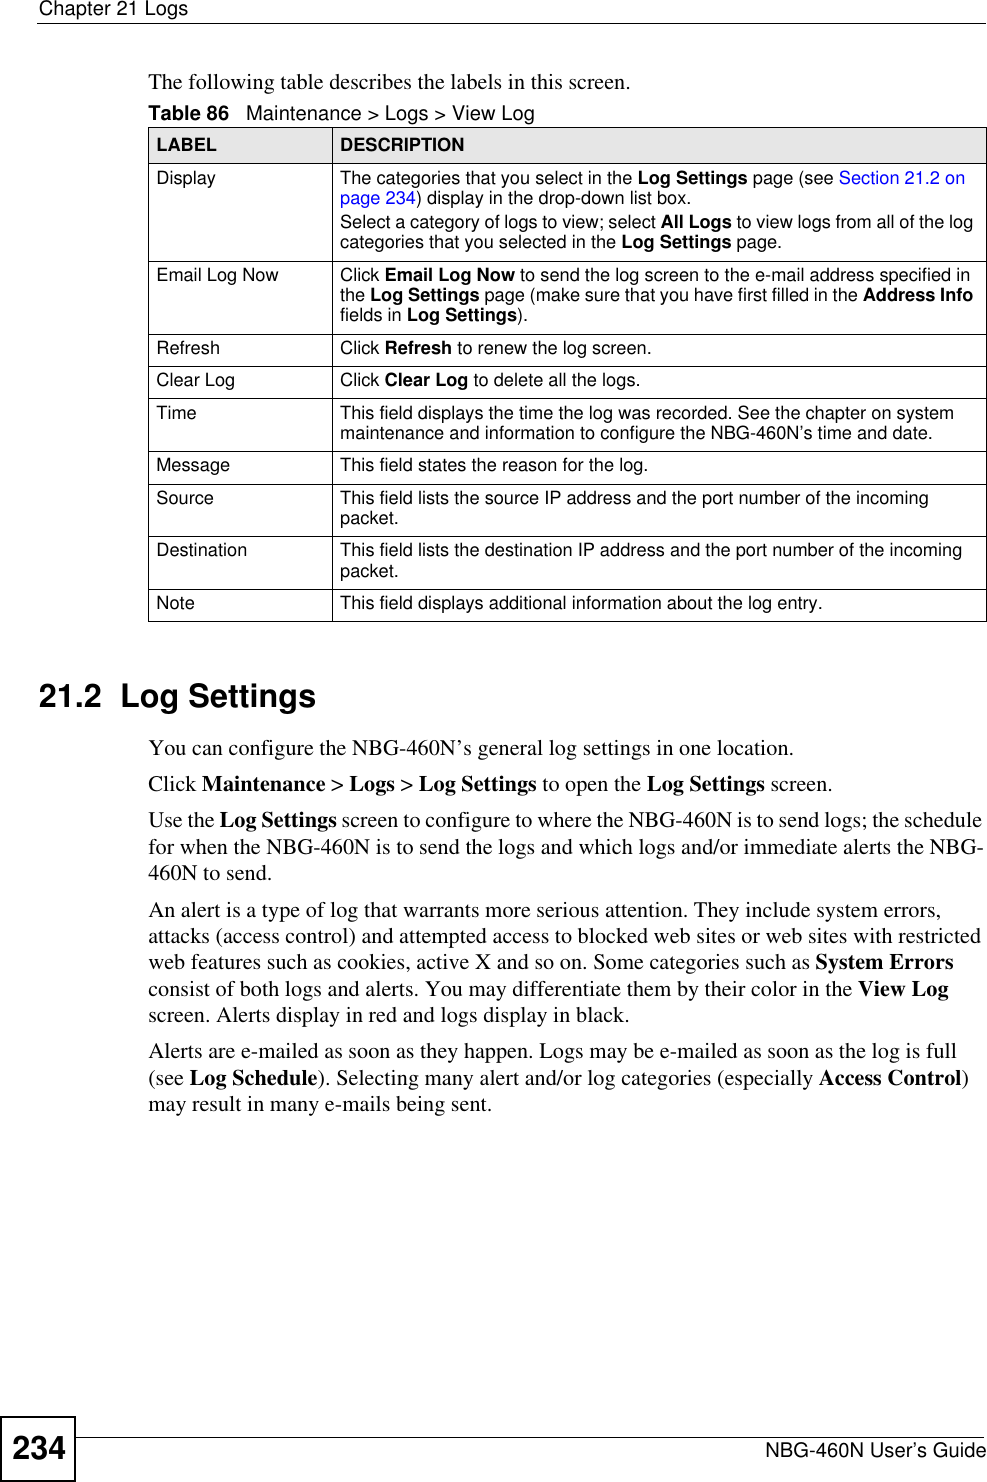 Chapter 21 LogsNBG-460N User’s Guide234The following table describes the labels in this screen.21.2  Log SettingsYou can configure the NBG-460N’s general log settings in one location.Click Maintenance &gt; Logs &gt; Log Settings to open the Log Settings screen.Use the Log Settings screen to configure to where the NBG-460N is to send logs; the schedule for when the NBG-460N is to send the logs and which logs and/or immediate alerts the NBG-460N to send.An alert is a type of log that warrants more serious attention. They include system errors, attacks (access control) and attempted access to blocked web sites or web sites with restricted web features such as cookies, active X and so on. Some categories such as System Errorsconsist of both logs and alerts. You may differentiate them by their color in the View Log screen. Alerts display in red and logs display in black.Alerts are e-mailed as soon as they happen. Logs may be e-mailed as soon as the log is full (see Log Schedule). Selecting many alert and/or log categories (especially Access Control)may result in many e-mails being sent.Table 86   Maintenance &gt; Logs &gt; View LogLABEL DESCRIPTIONDisplay  The categories that you select in the Log Settings page (see Section 21.2 on page 234) display in the drop-down list box.Select a category of logs to view; select All Logs to view logs from all of the log categories that you selected in the Log Settings page. Email Log Now  Click Email Log Now to send the log screen to the e-mail address specified in the Log Settings page (make sure that you have first filled in the Address Infofields in Log Settings).Refresh Click Refresh to renew the log screen. Clear Log  Click Clear Log to delete all the logs. Time This field displays the time the log was recorded. See the chapter on system maintenance and information to configure the NBG-460N’s time and date.Message This field states the reason for the log.Source This field lists the source IP address and the port number of the incoming packet.Destination  This field lists the destination IP address and the port number of the incoming packet.Note This field displays additional information about the log entry. 